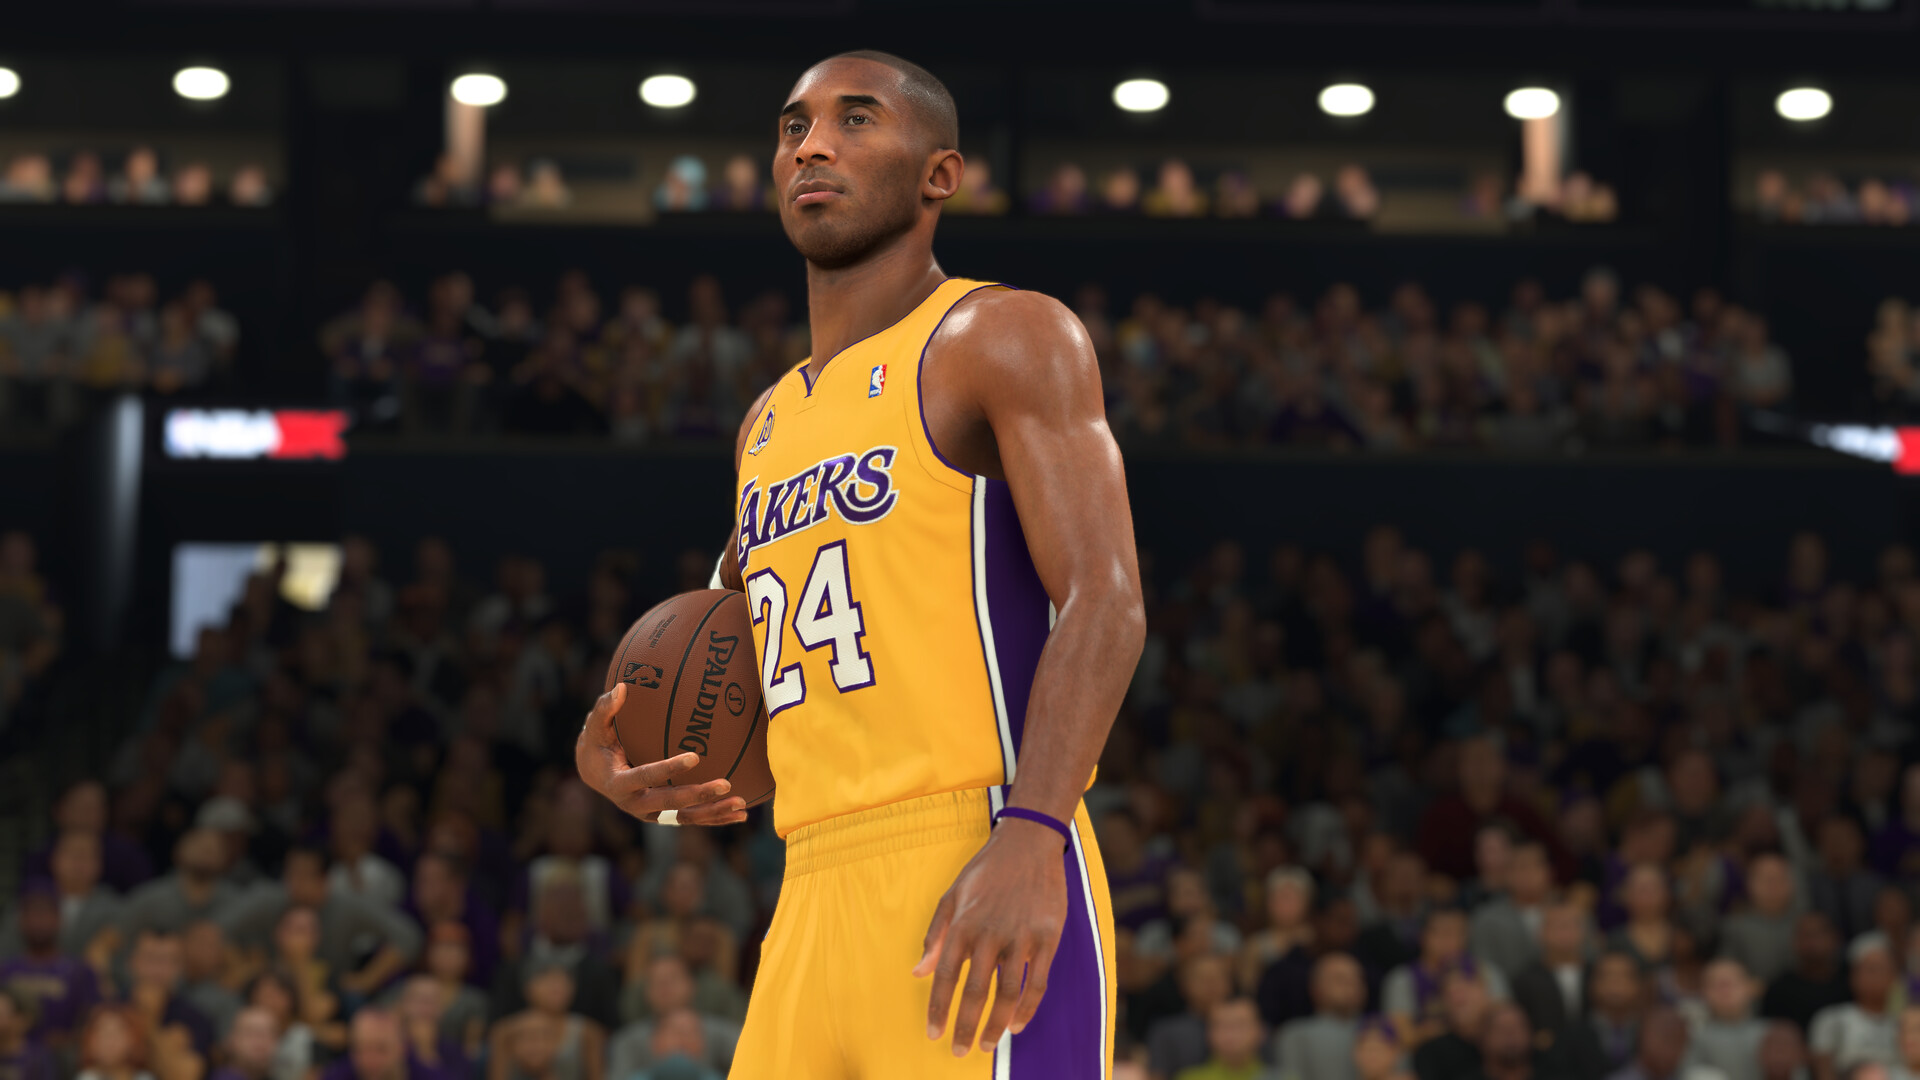 NBA 2K24 has already become the second lowest-rated game in